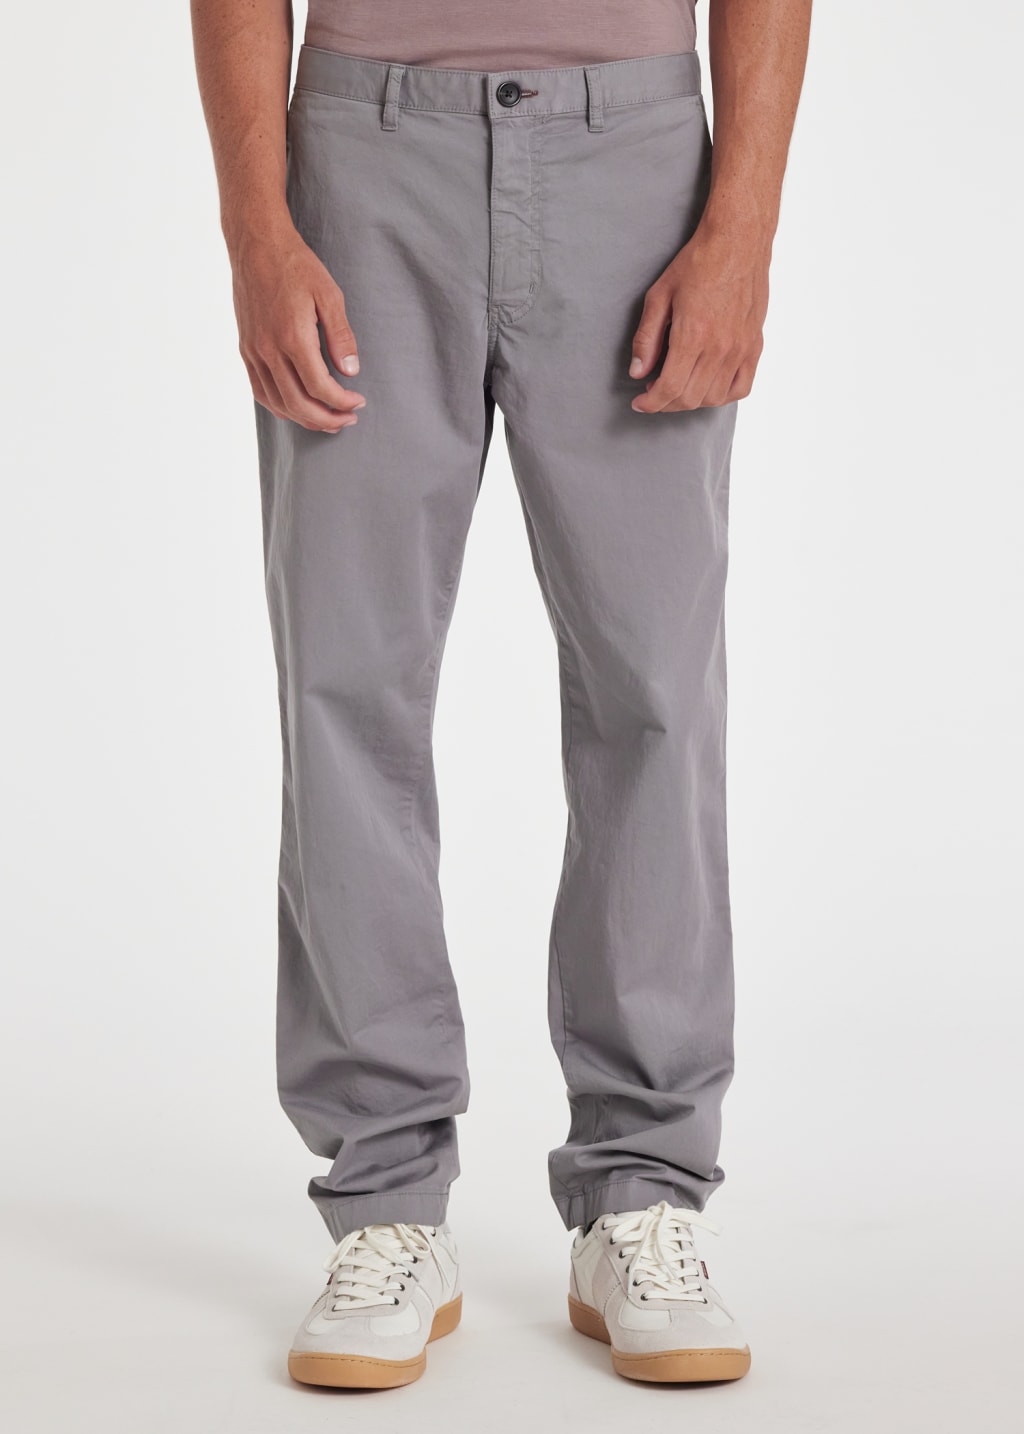 Men's Tapered-Fit Pale Grey Stretch-Cotton Chinos